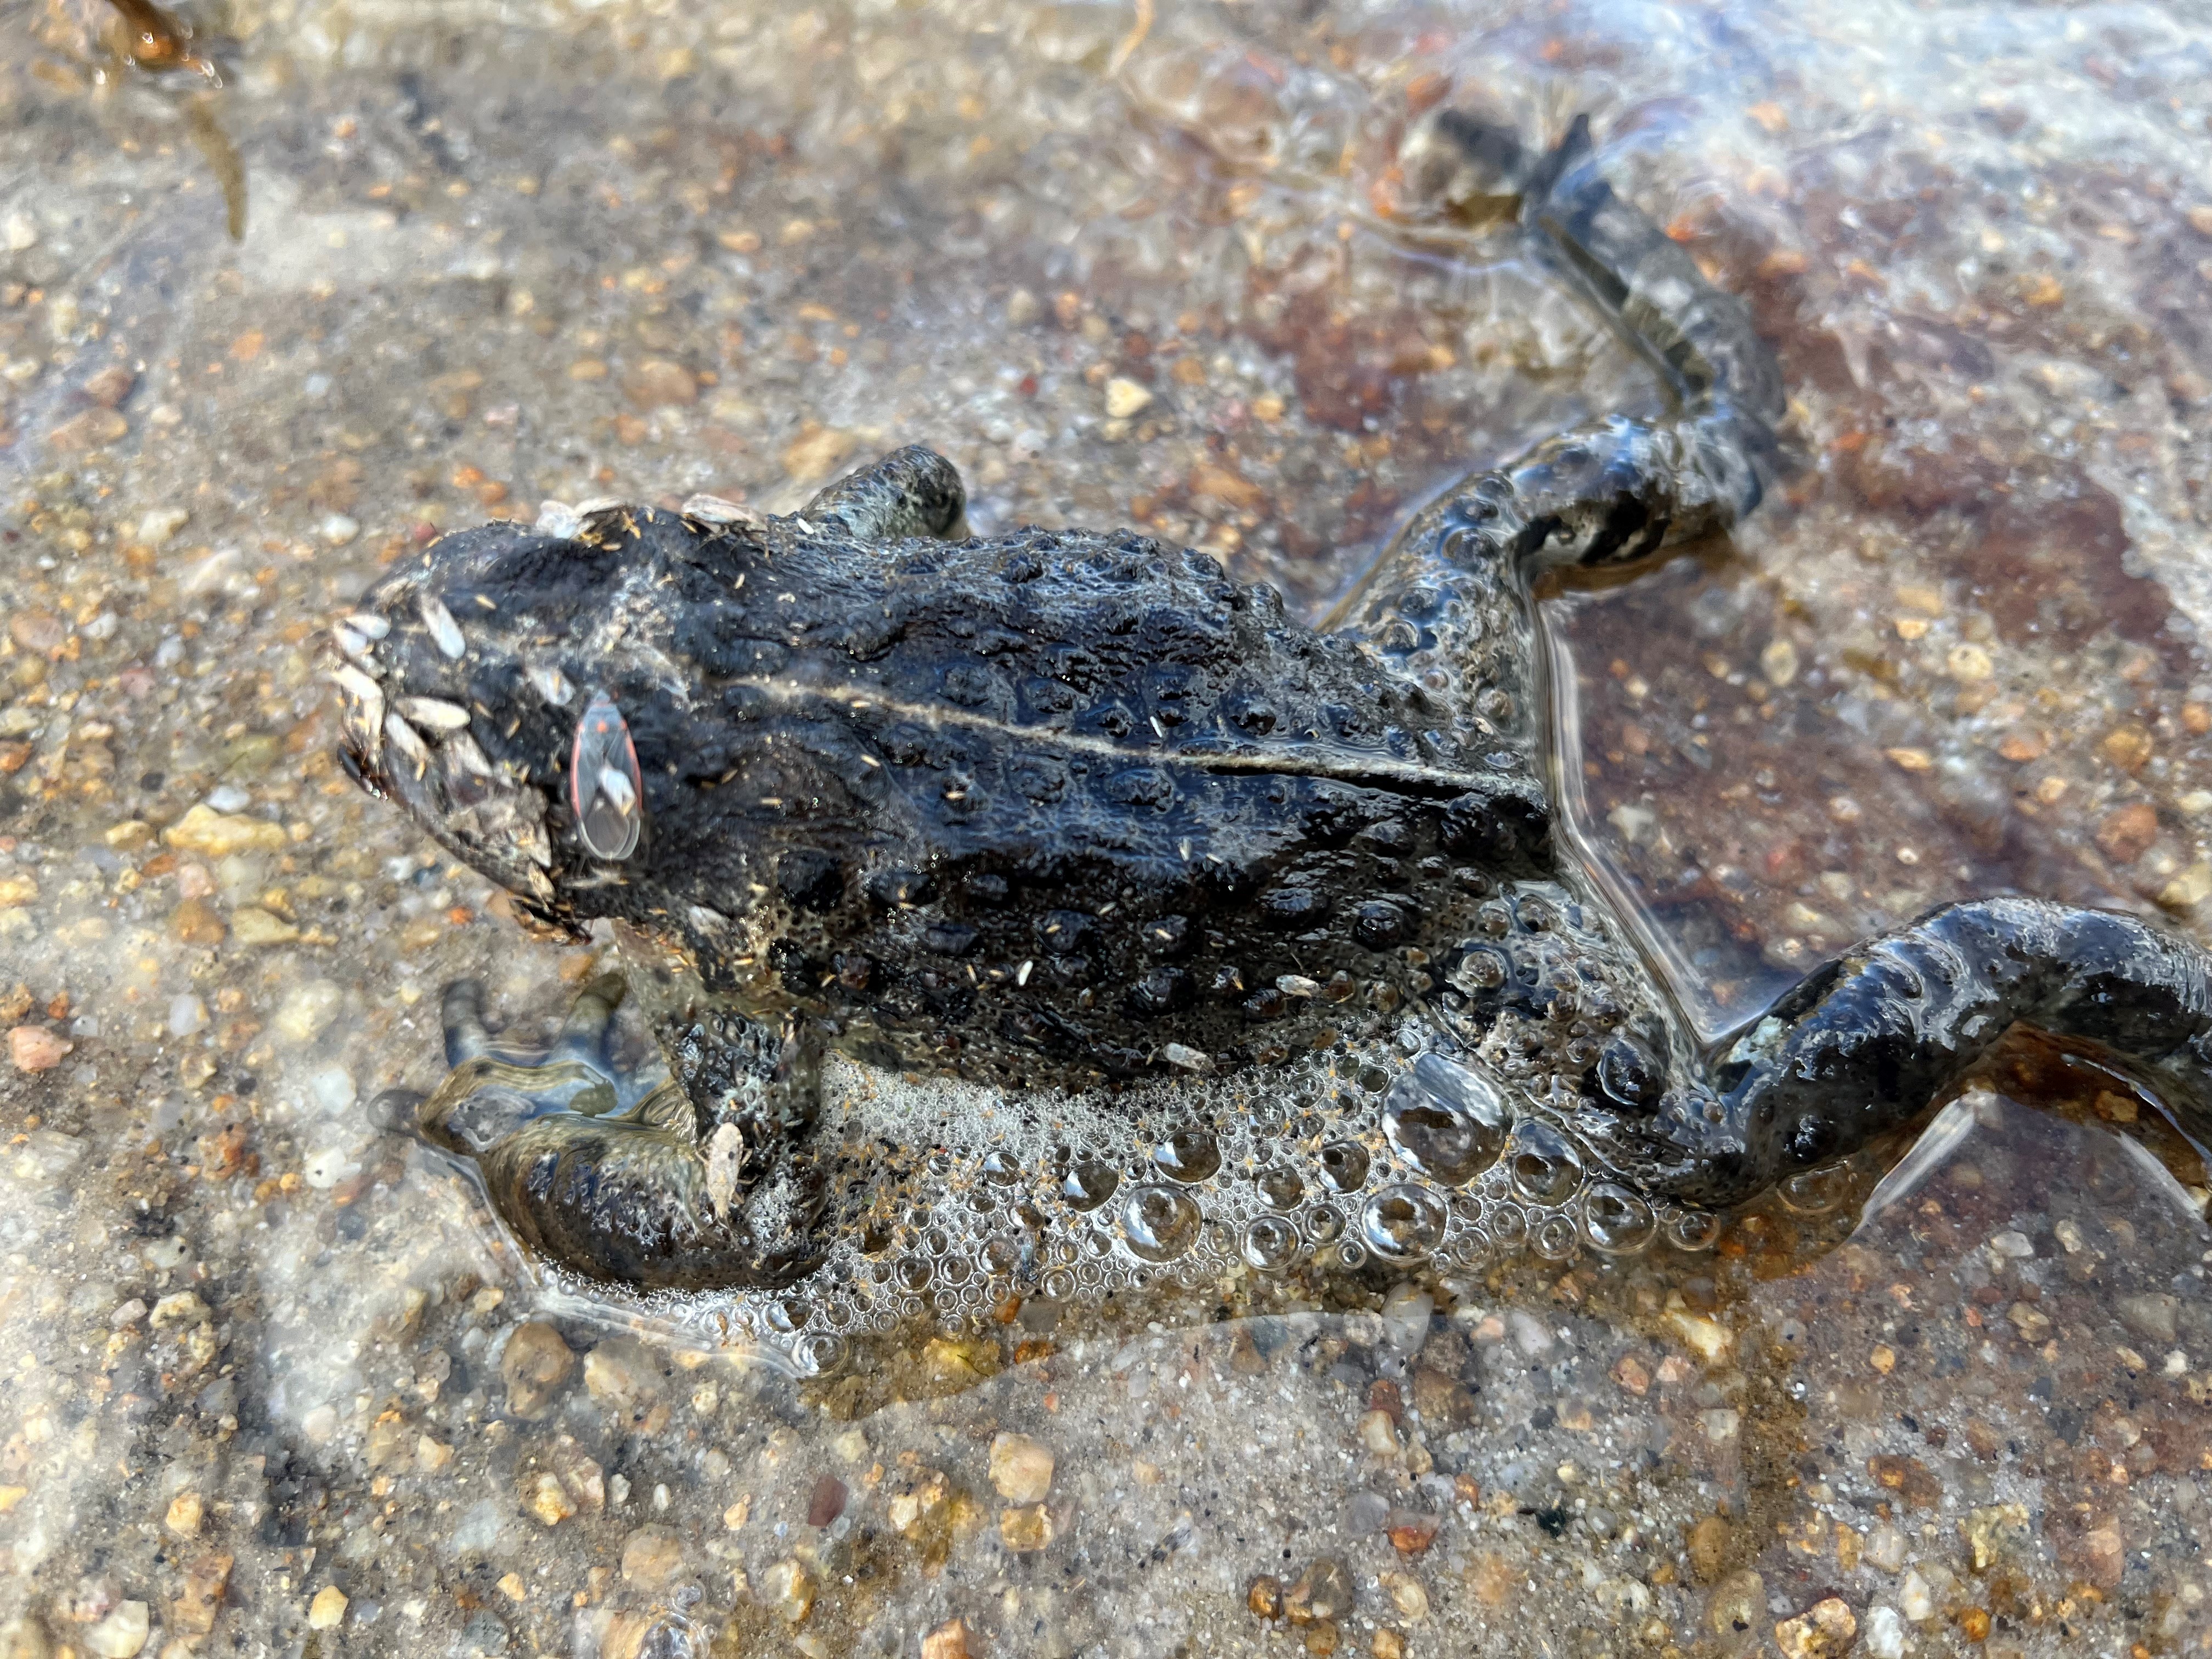 A dead boreal toad found at Lost Lake.